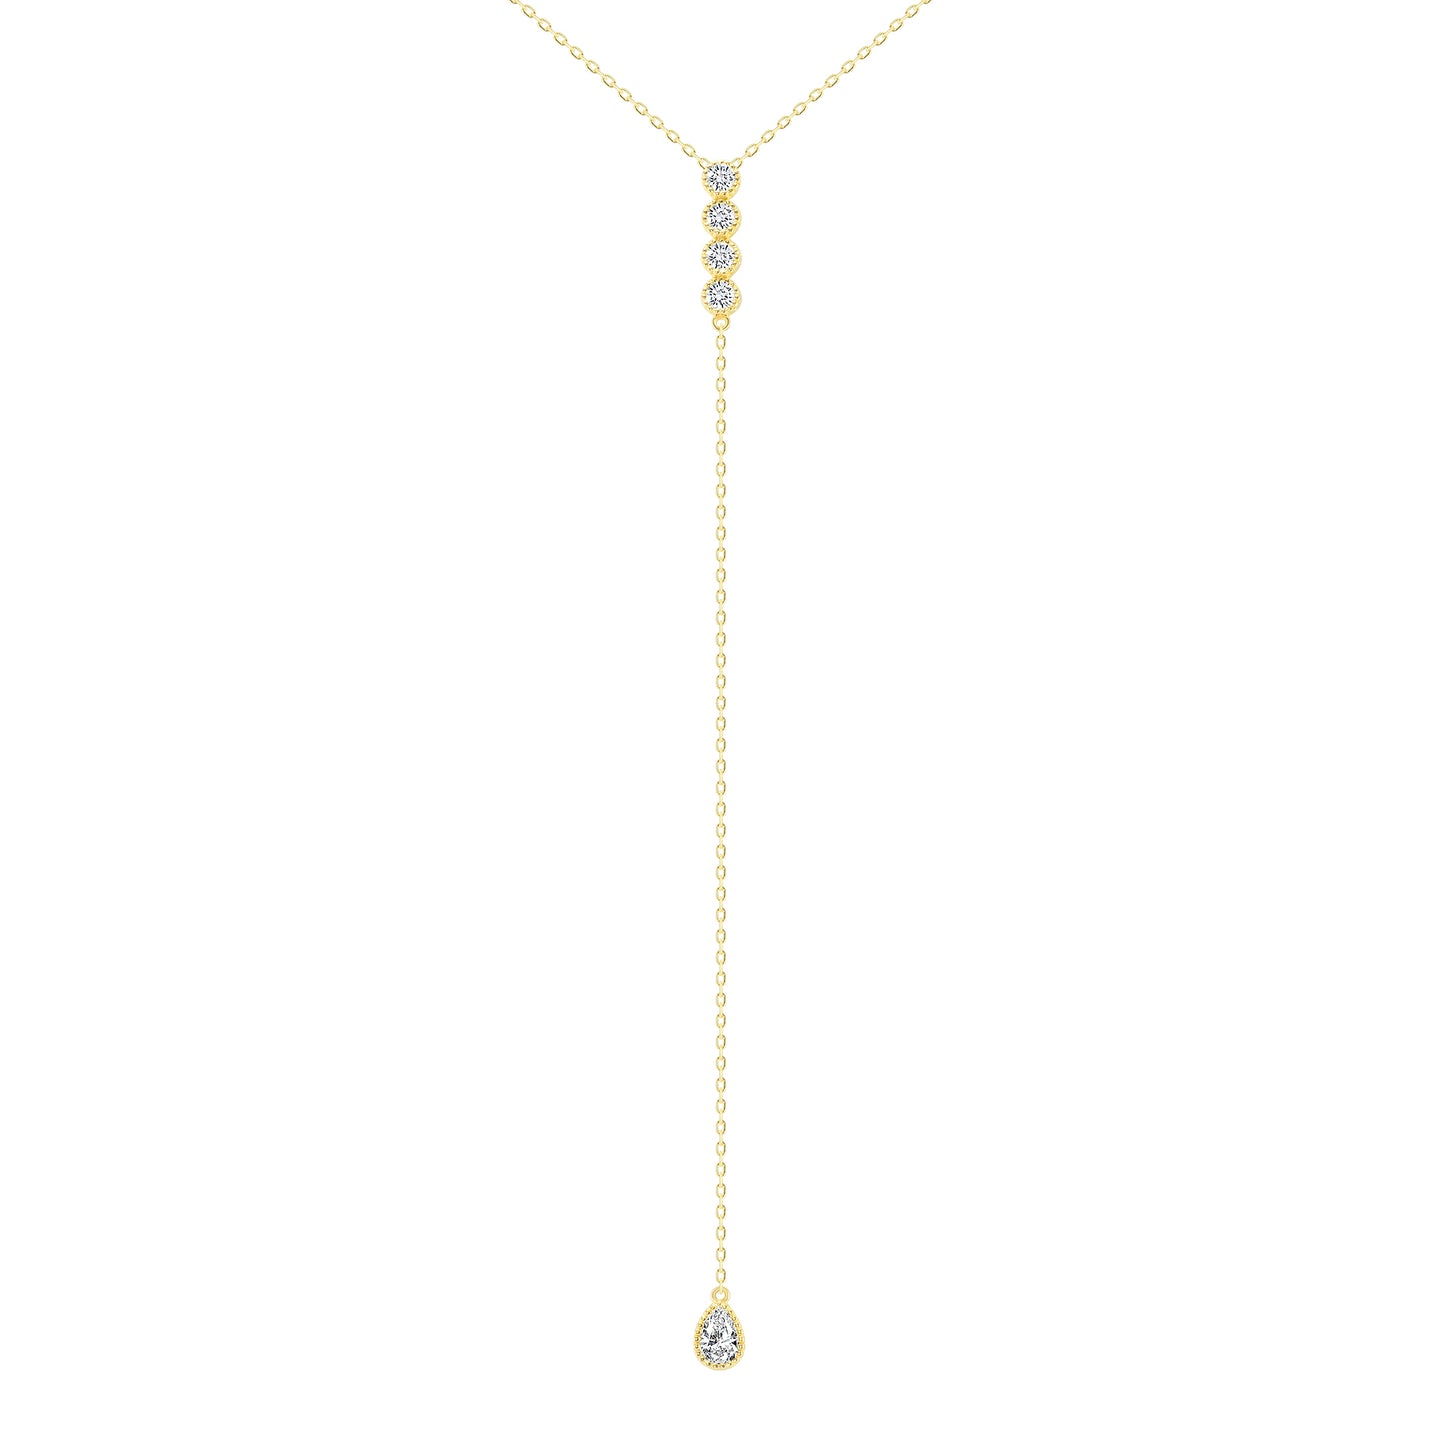 Silver 925 Gold Plated Drop Cubic Zirconia Necklace. DGN1205G